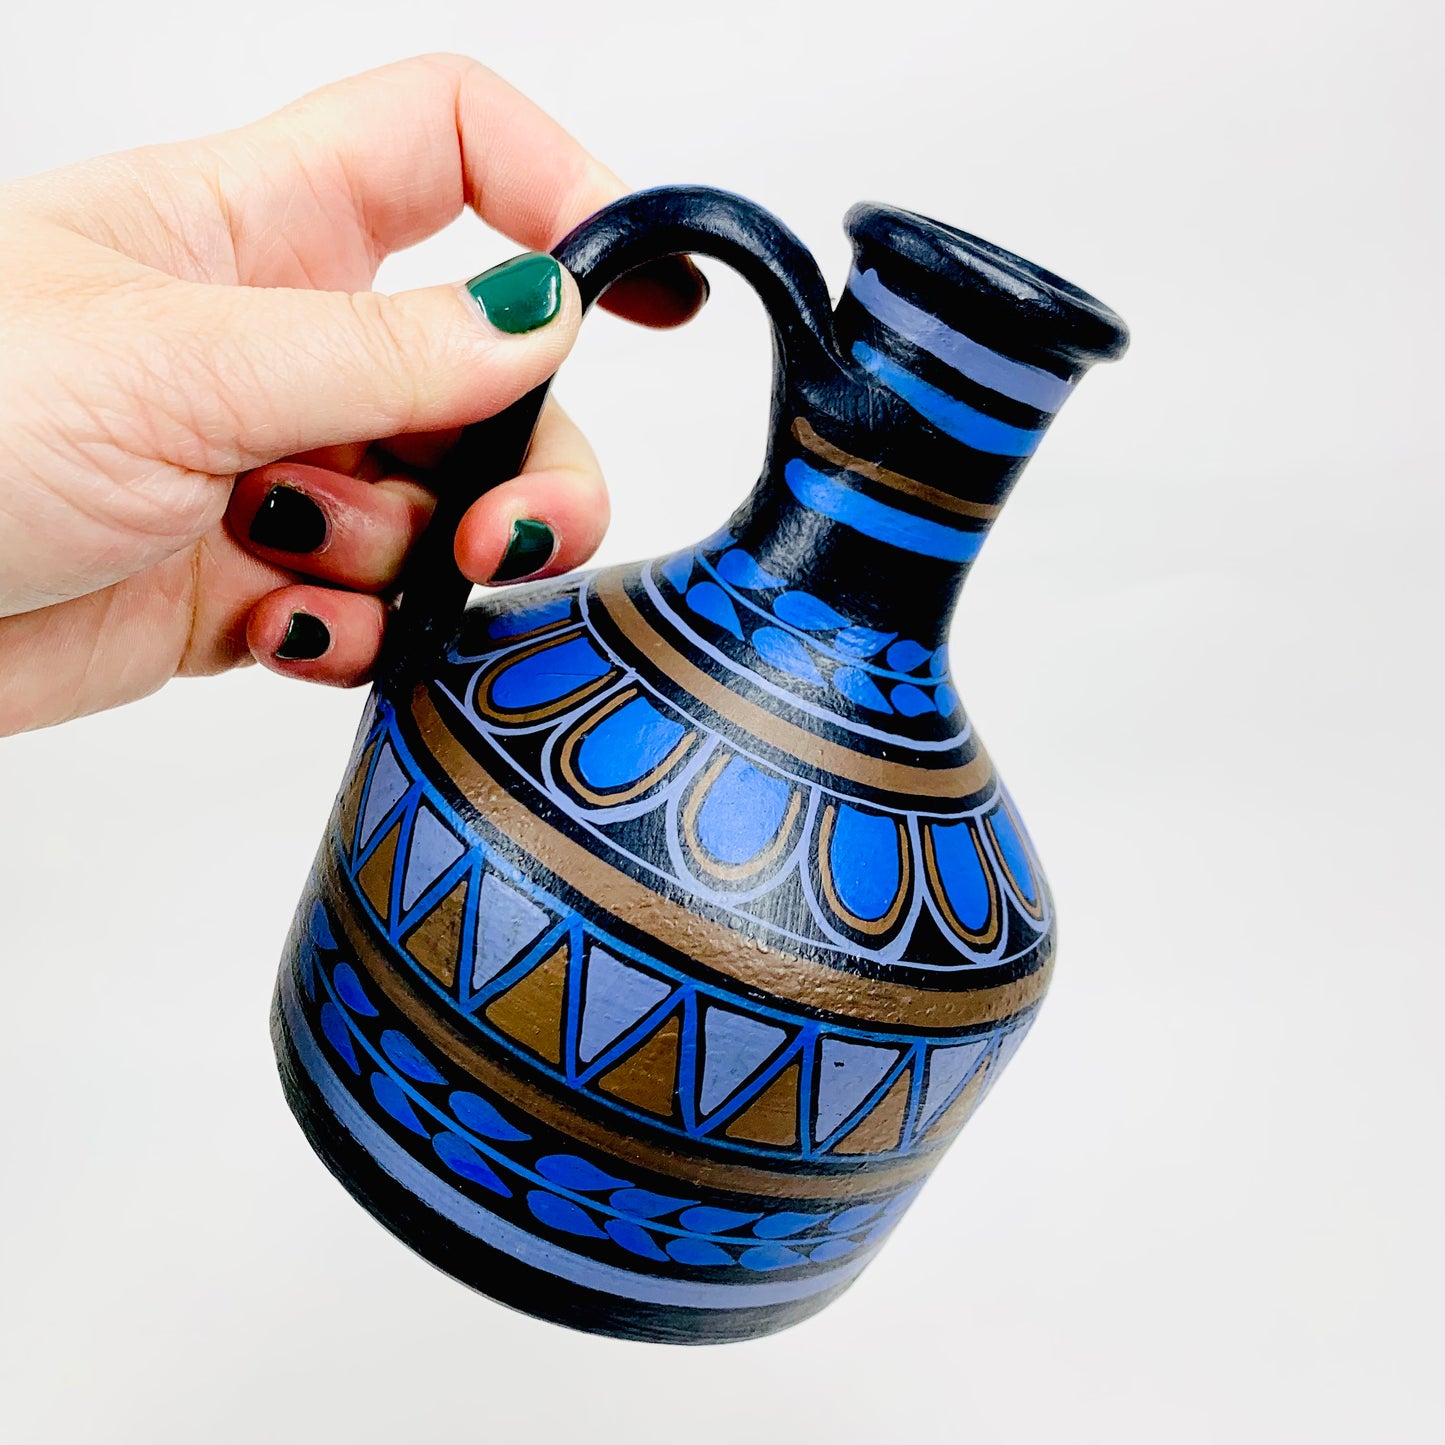 Extremely rare MCM hand painted blue pottery jug